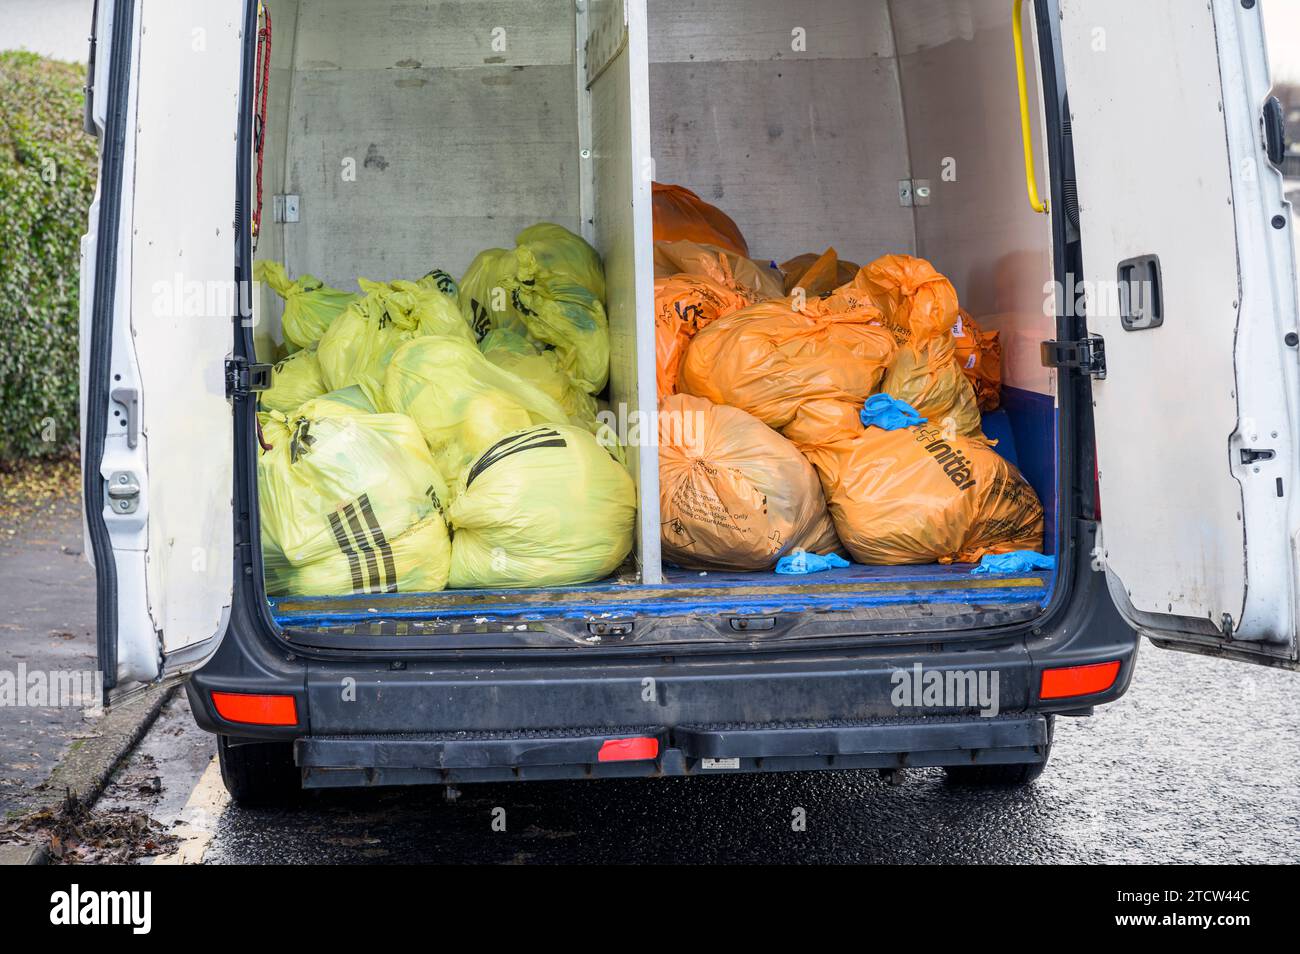 Initial Waste Management collected and separated into orange and yellow bags inside a van, Glasgow, Scotland, UK, Europe Stock Photo